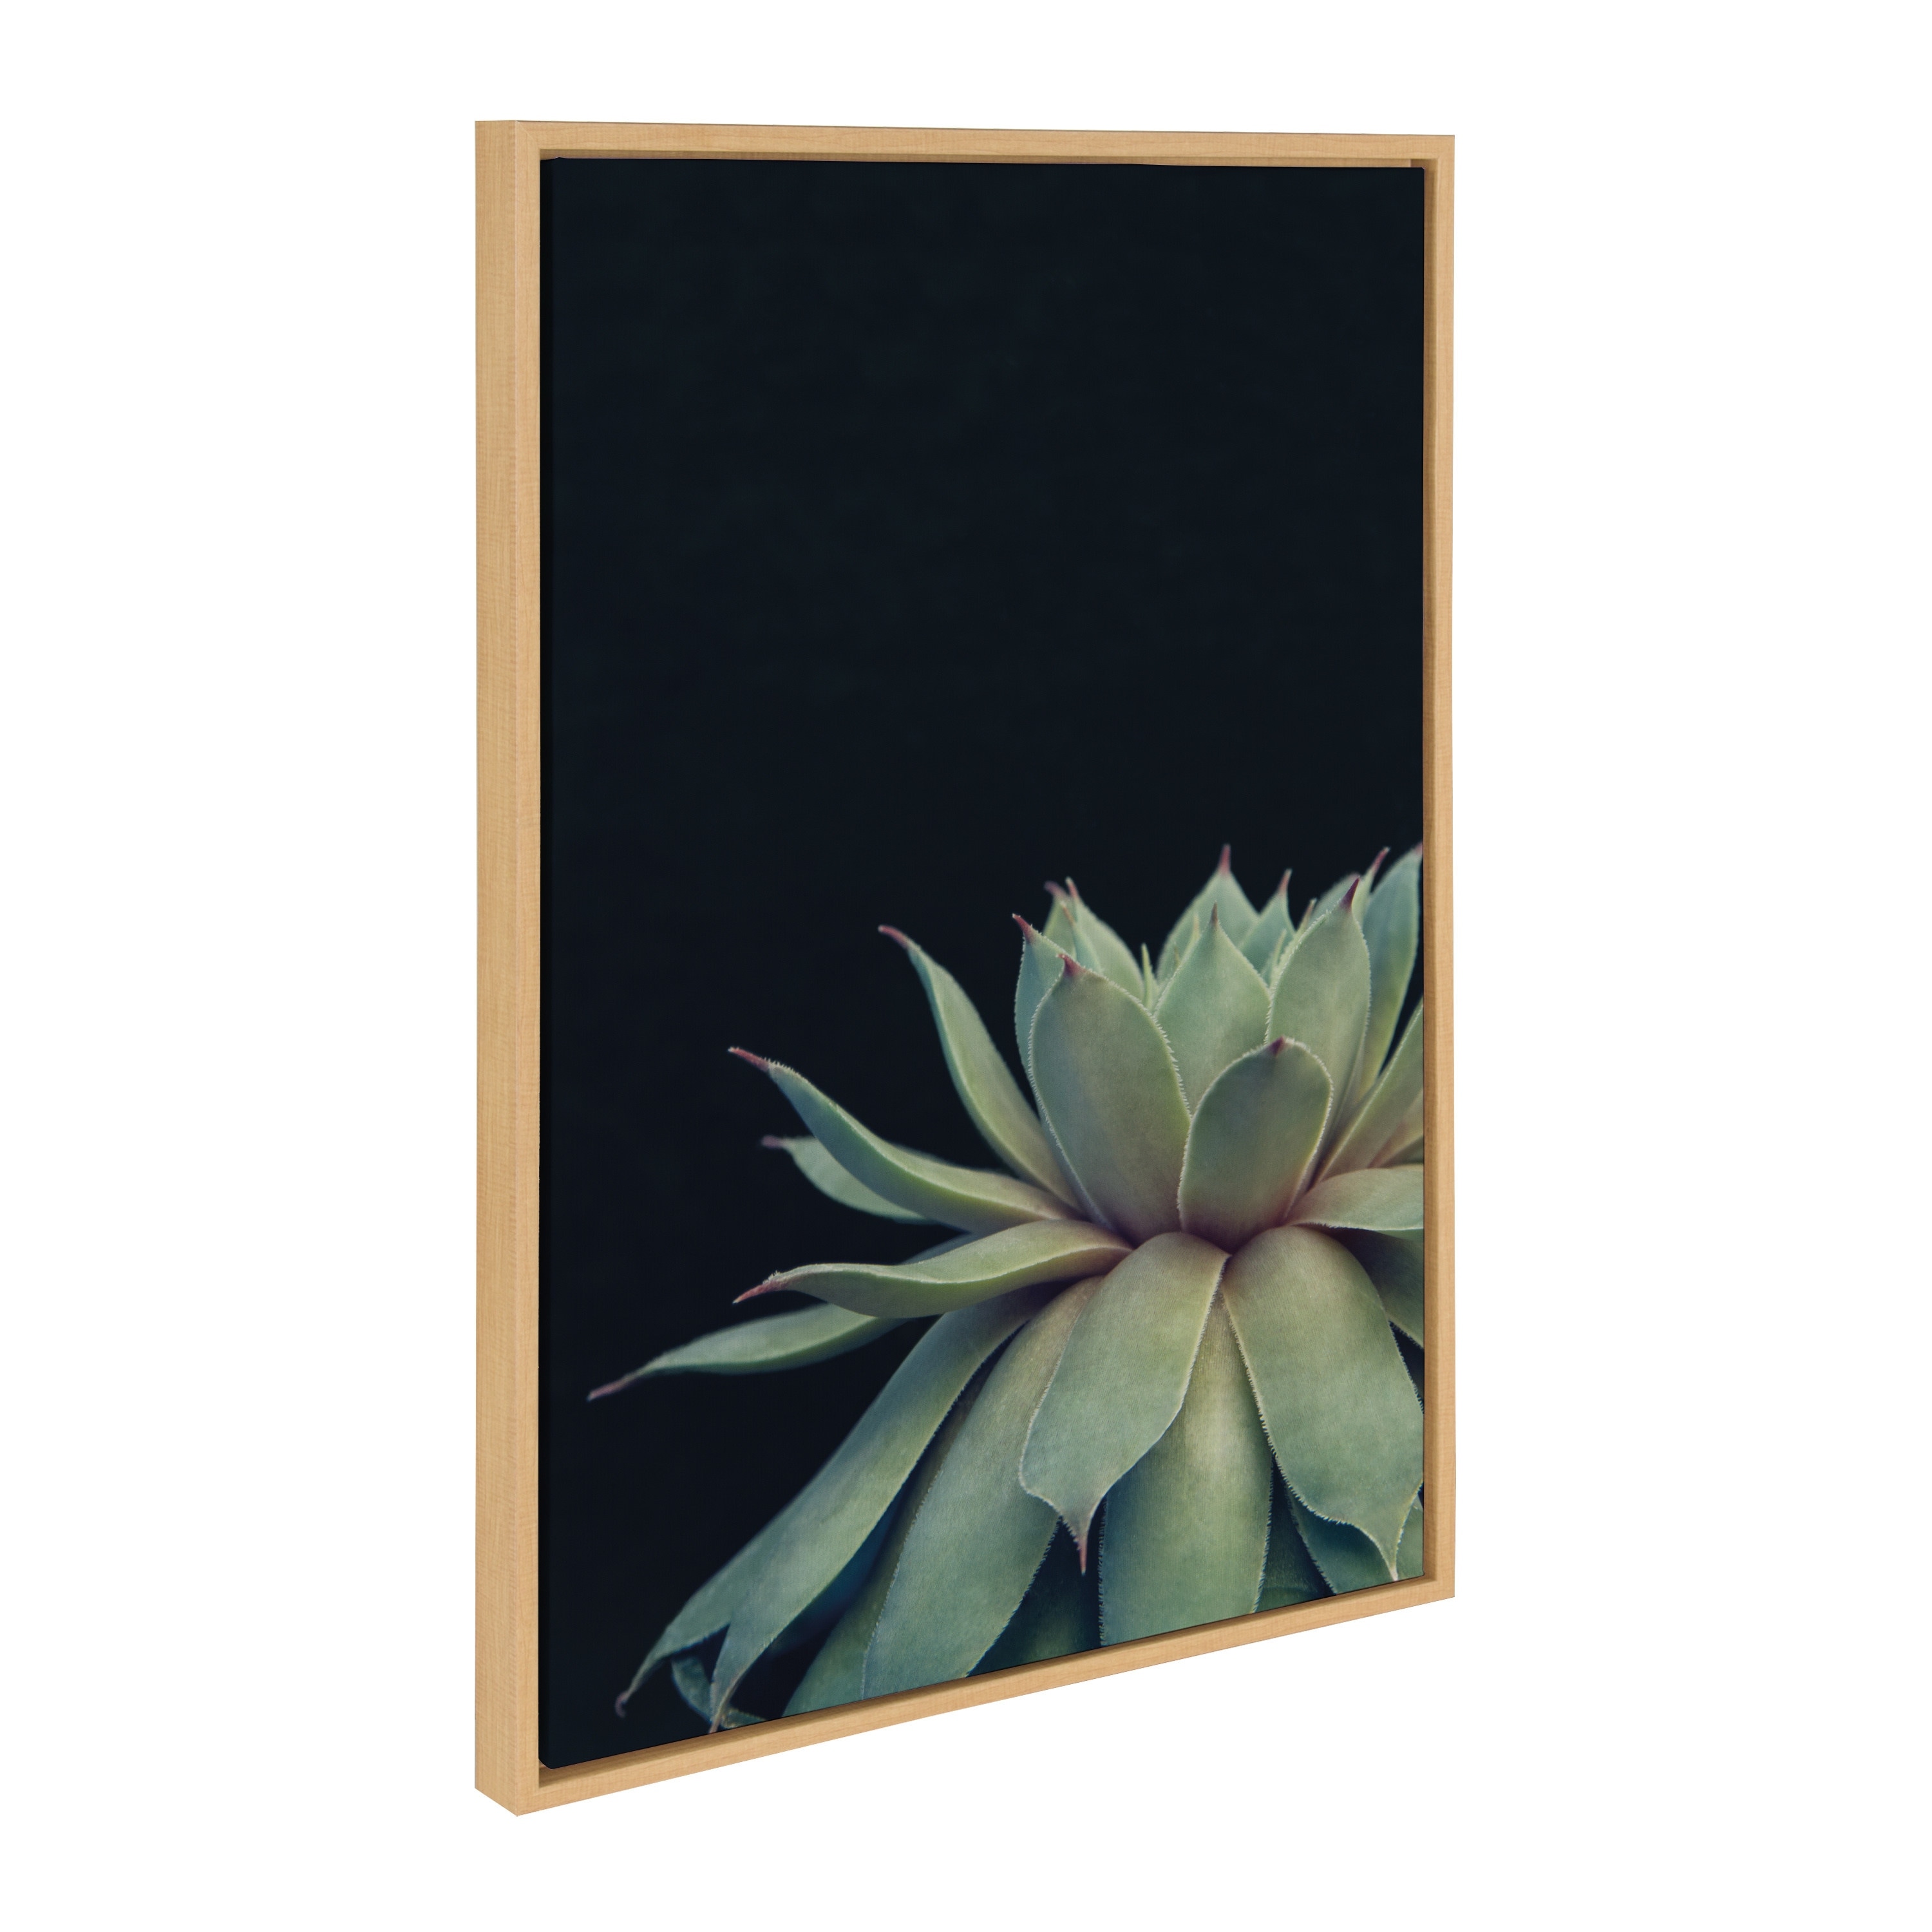 Sylvie Succulent 18x24 Gold Framed Canvas Wall Art by F2 Images Bed Bath   Beyond 17854134